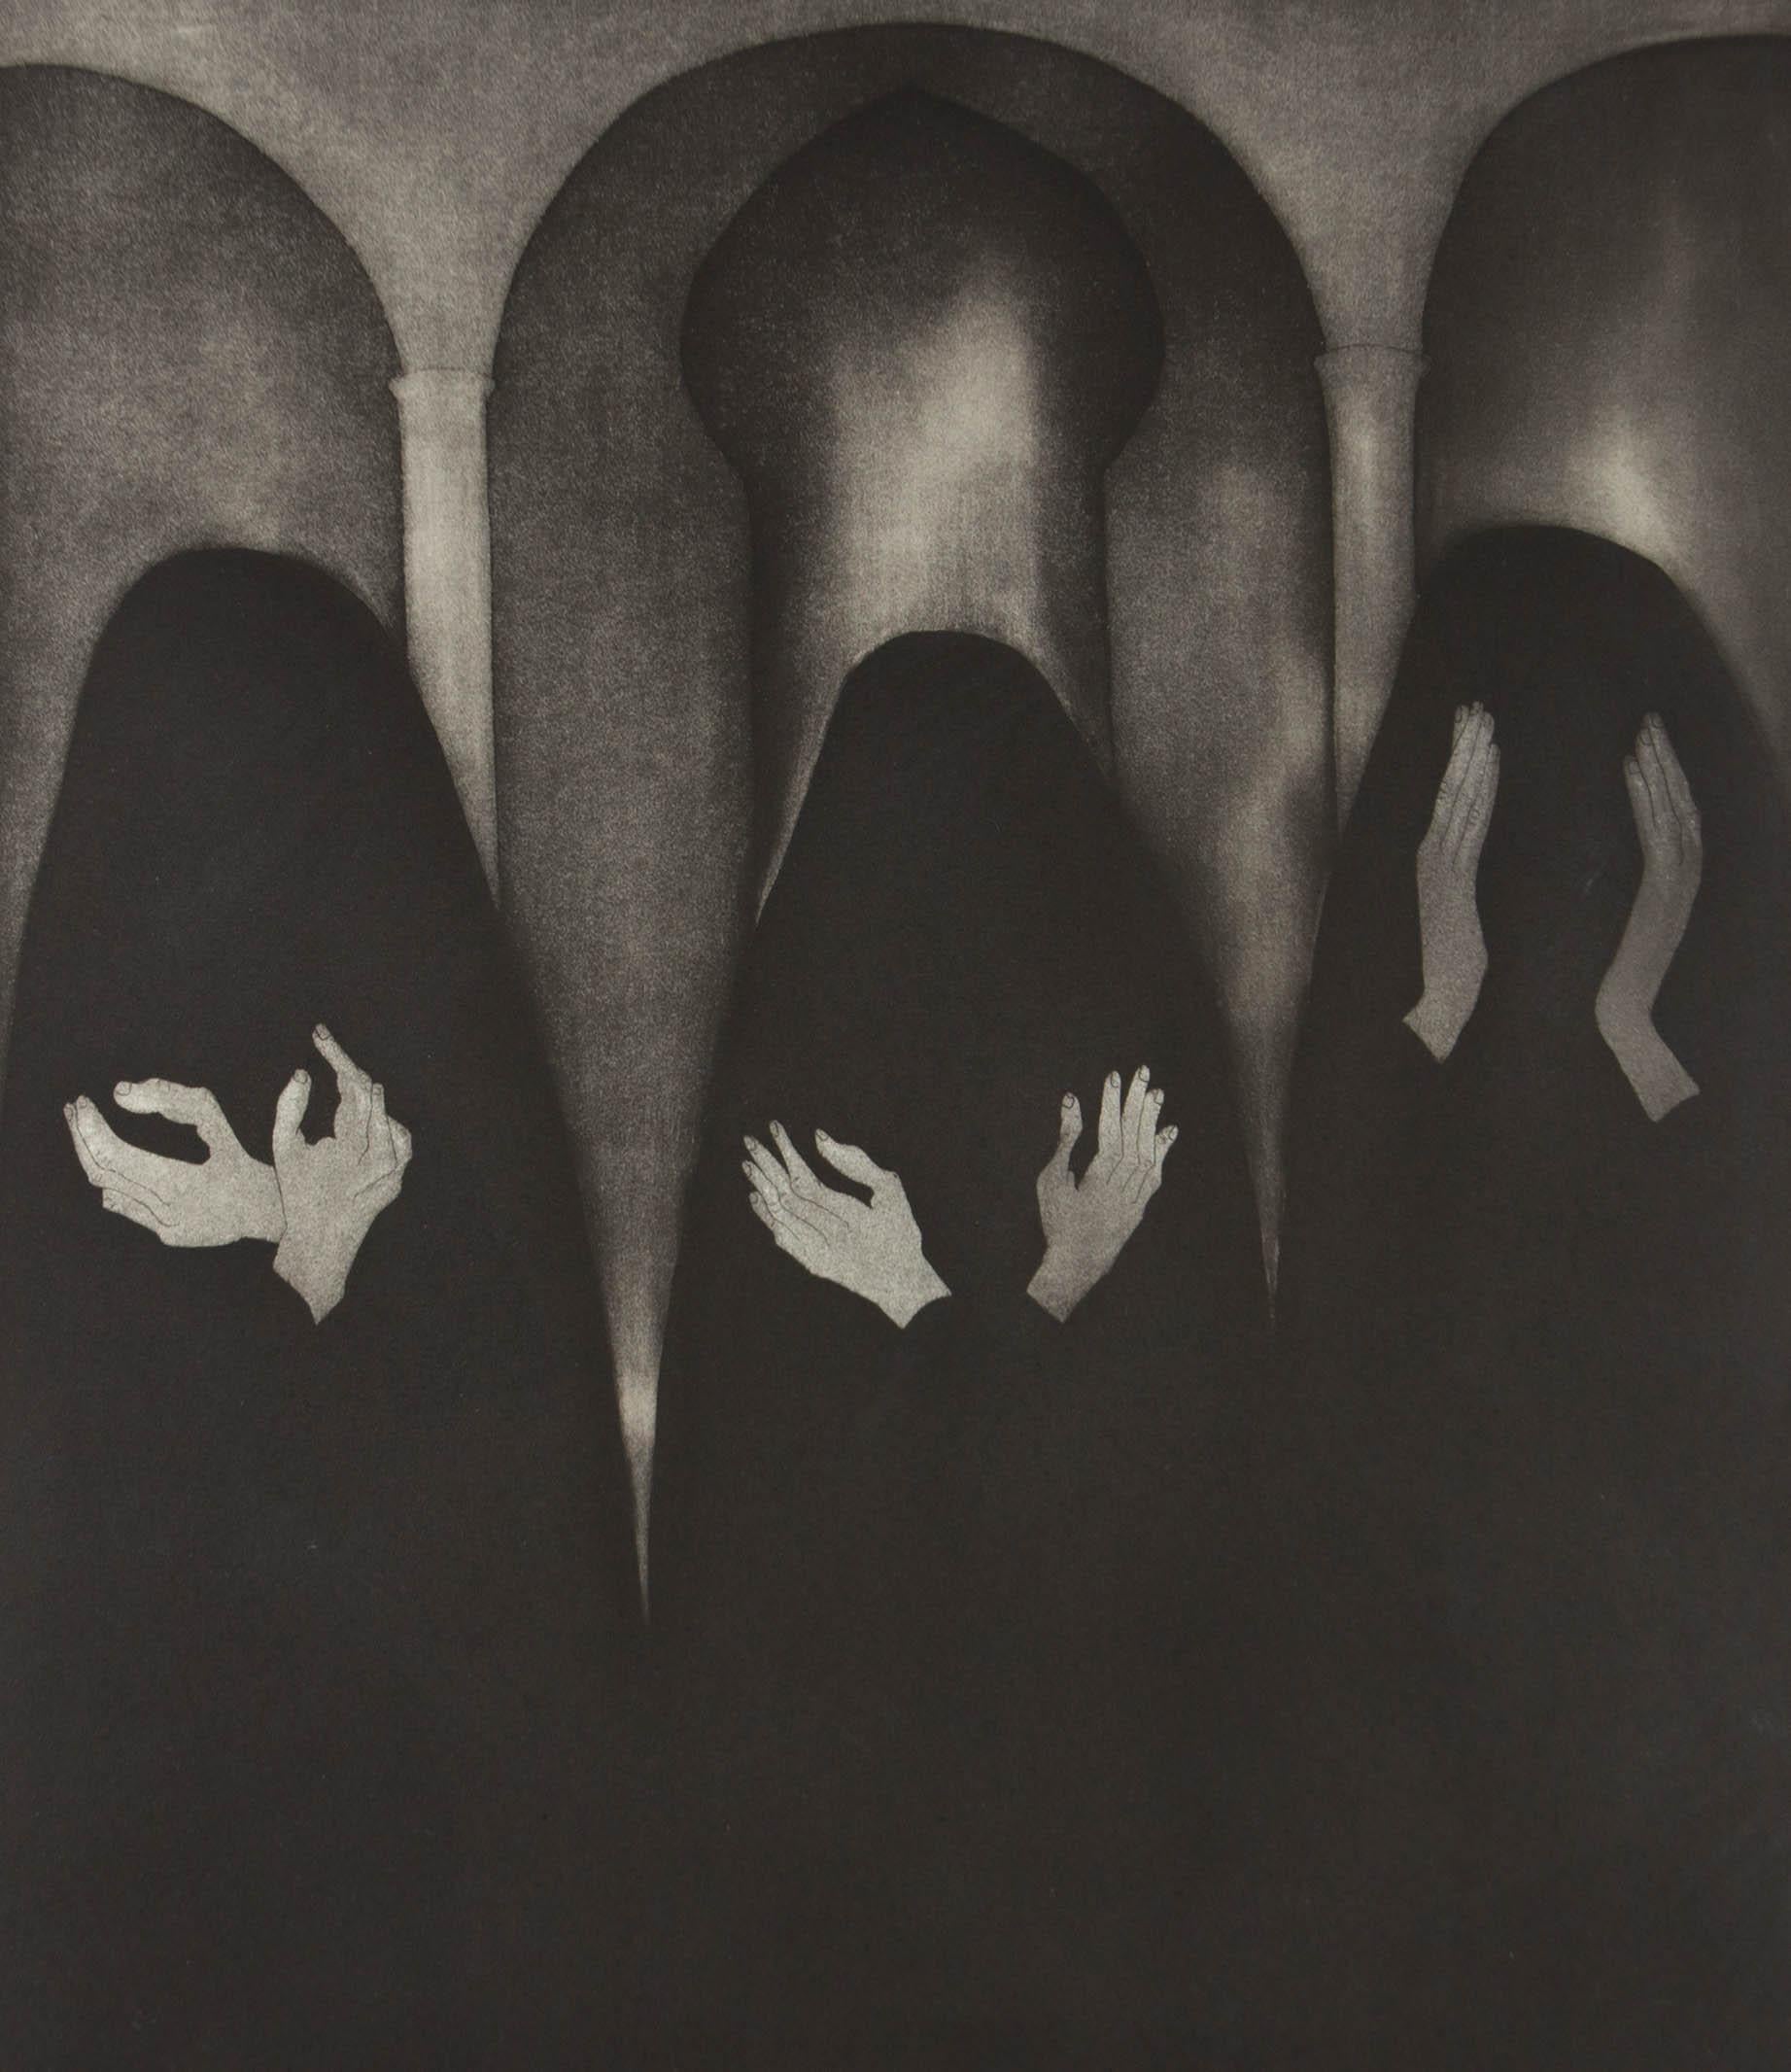 <p>A dark and striking acid etching showing a surreal trio of figures in black shrouds, with only their hands visible, each posed in front of the figure's body. This particular print is from Oliner's 